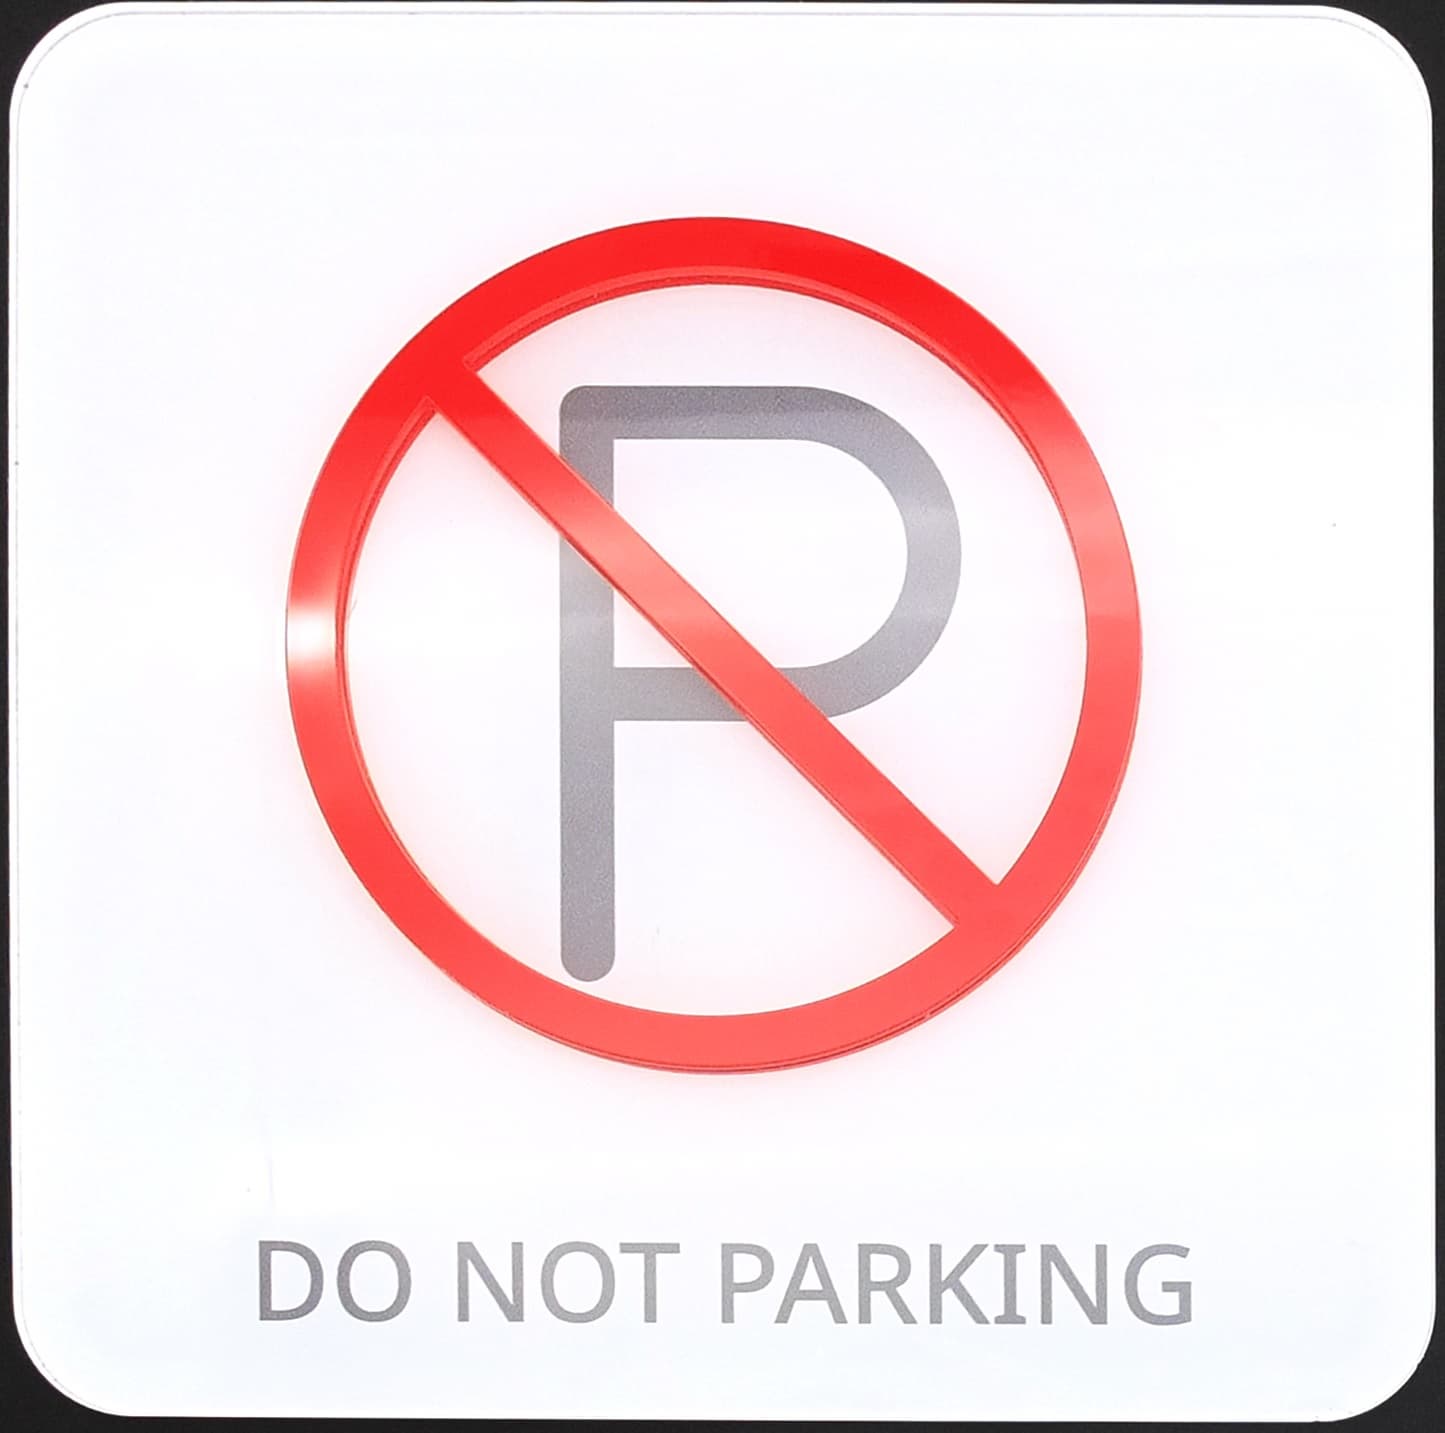 Do not parking sign board